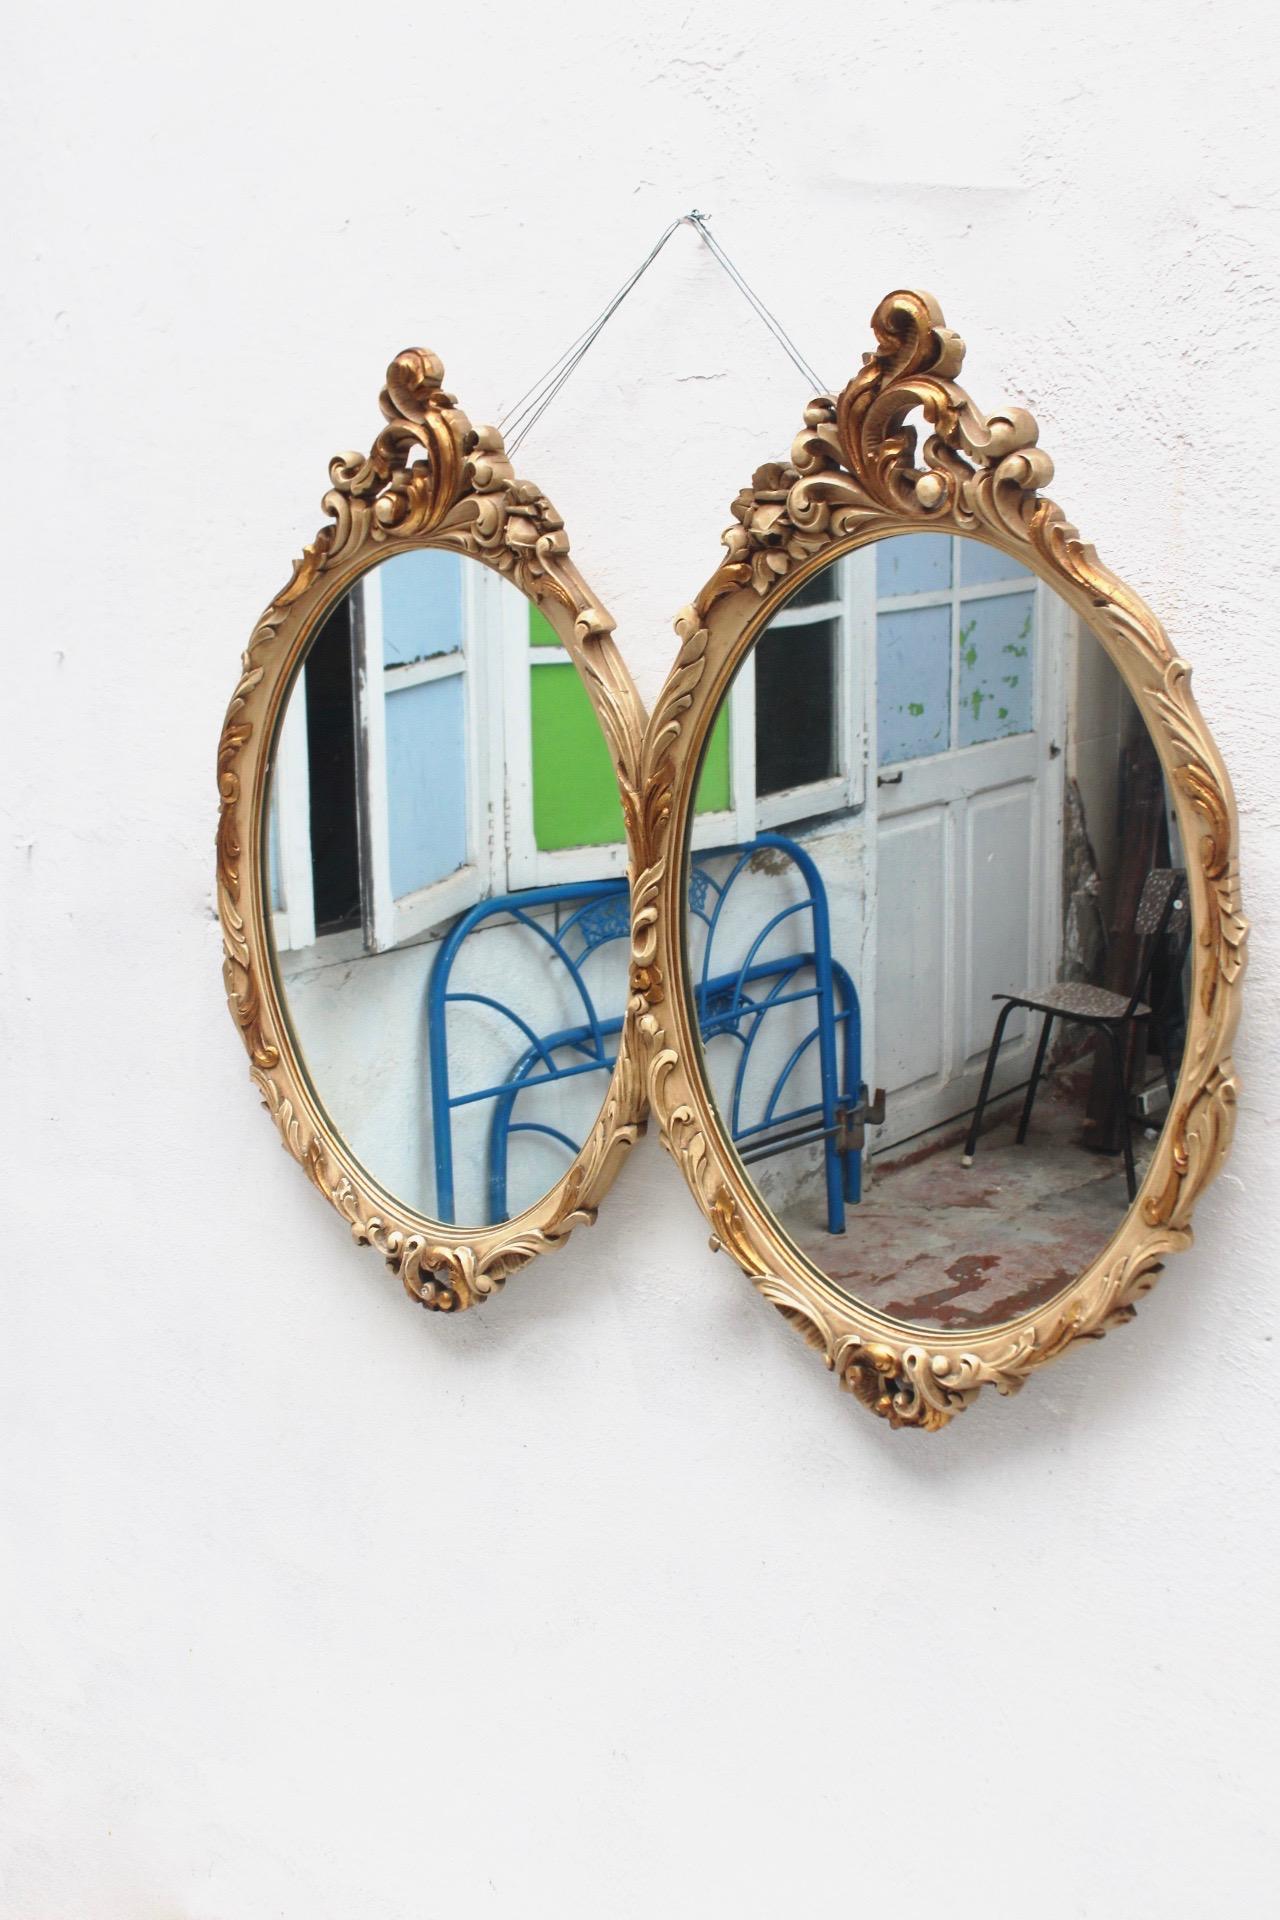 One of a kind midcentury handcrafted Louis XV Rococo/Baroque Neoclassical Revival Double Oval Handcrafted White Wood Wall Mirror by Mariano García, Valencia, Spain, 1960s. Made in one wood piece.
Mariano García, comes from one of the oldest Spanish